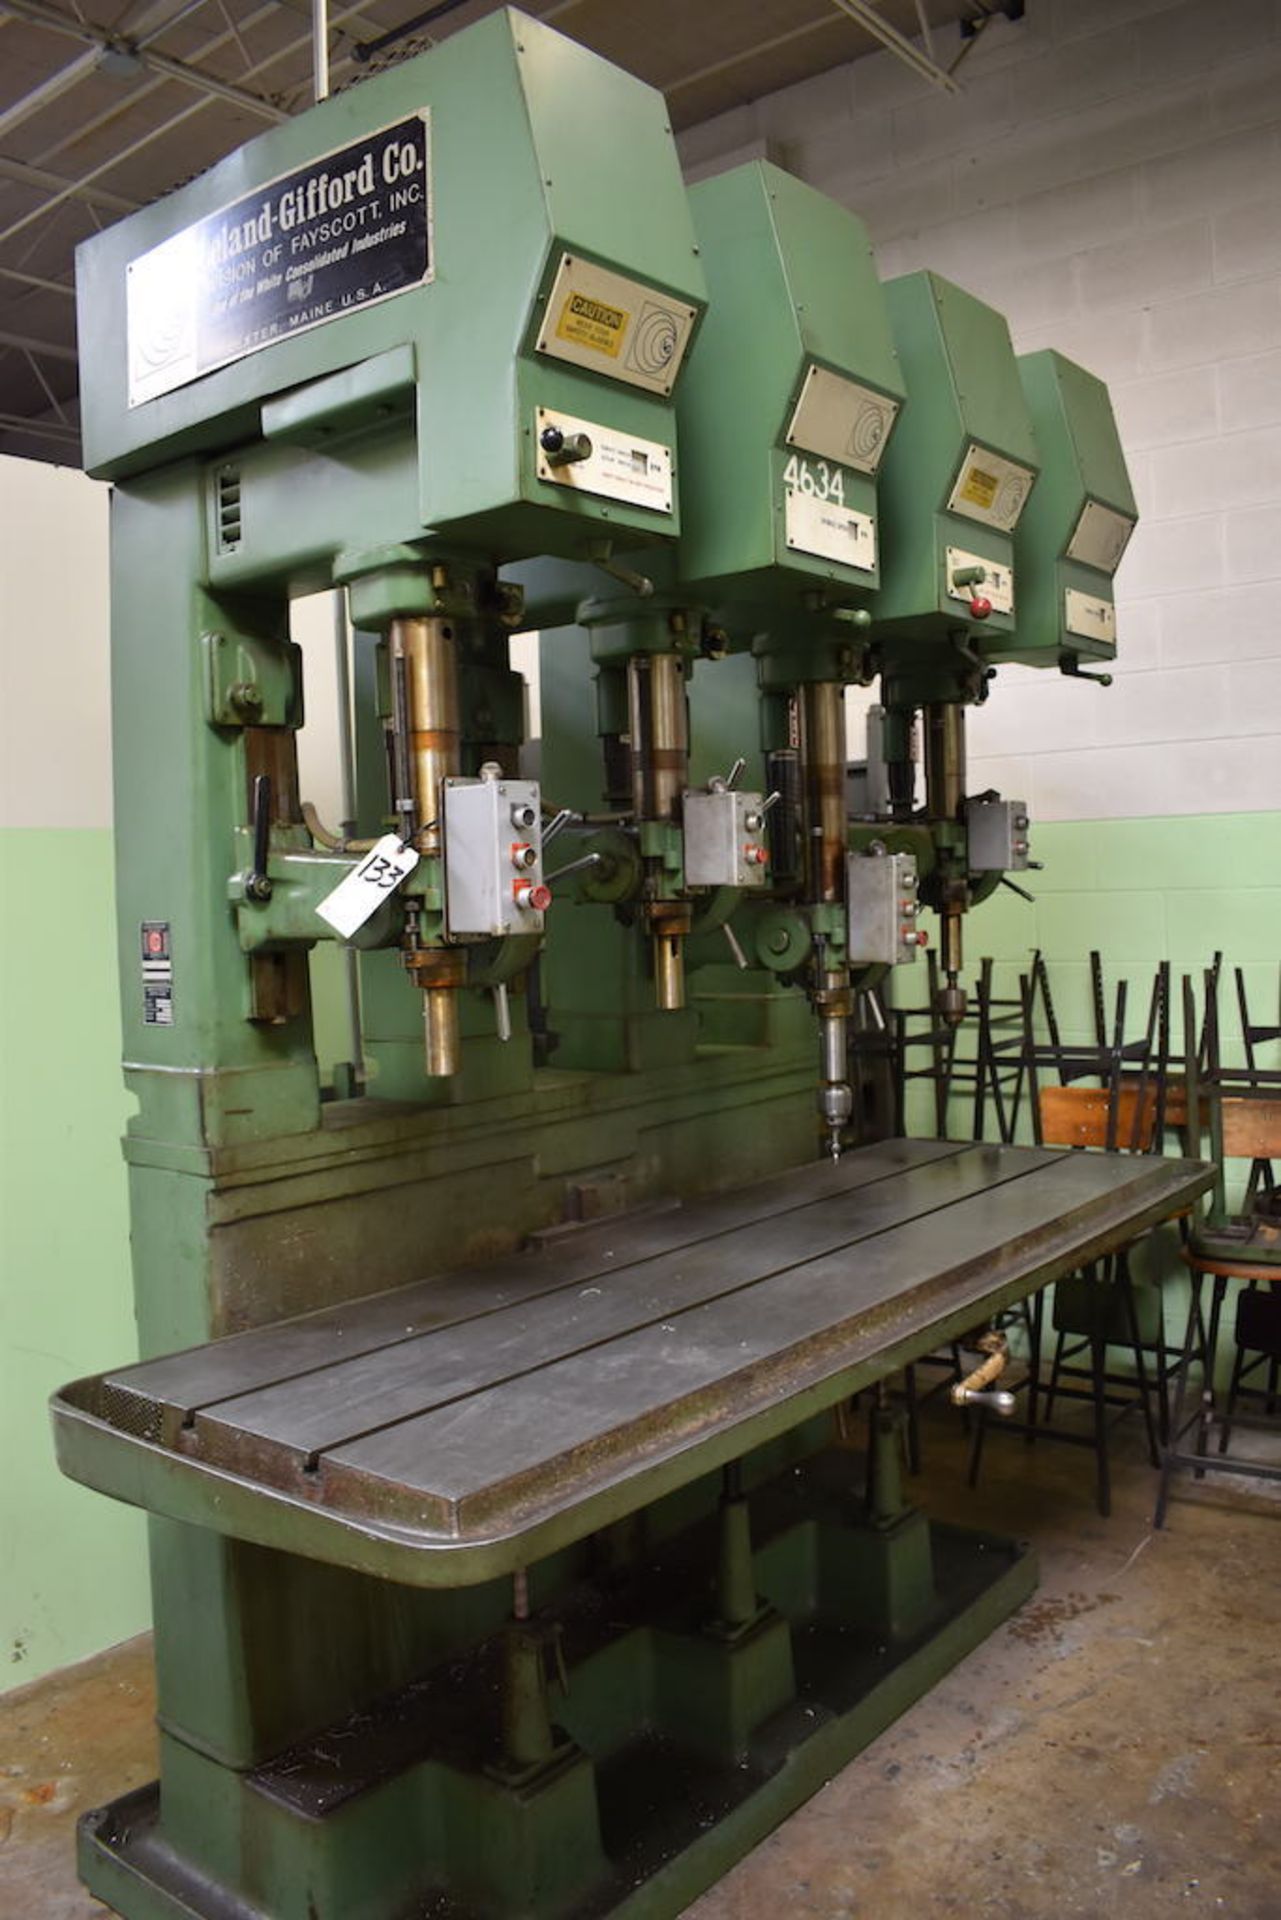 LELAND GIFFORD MODEL 2LMS 4-SPINDLE DRILL: S/N 2LMS 1200S,